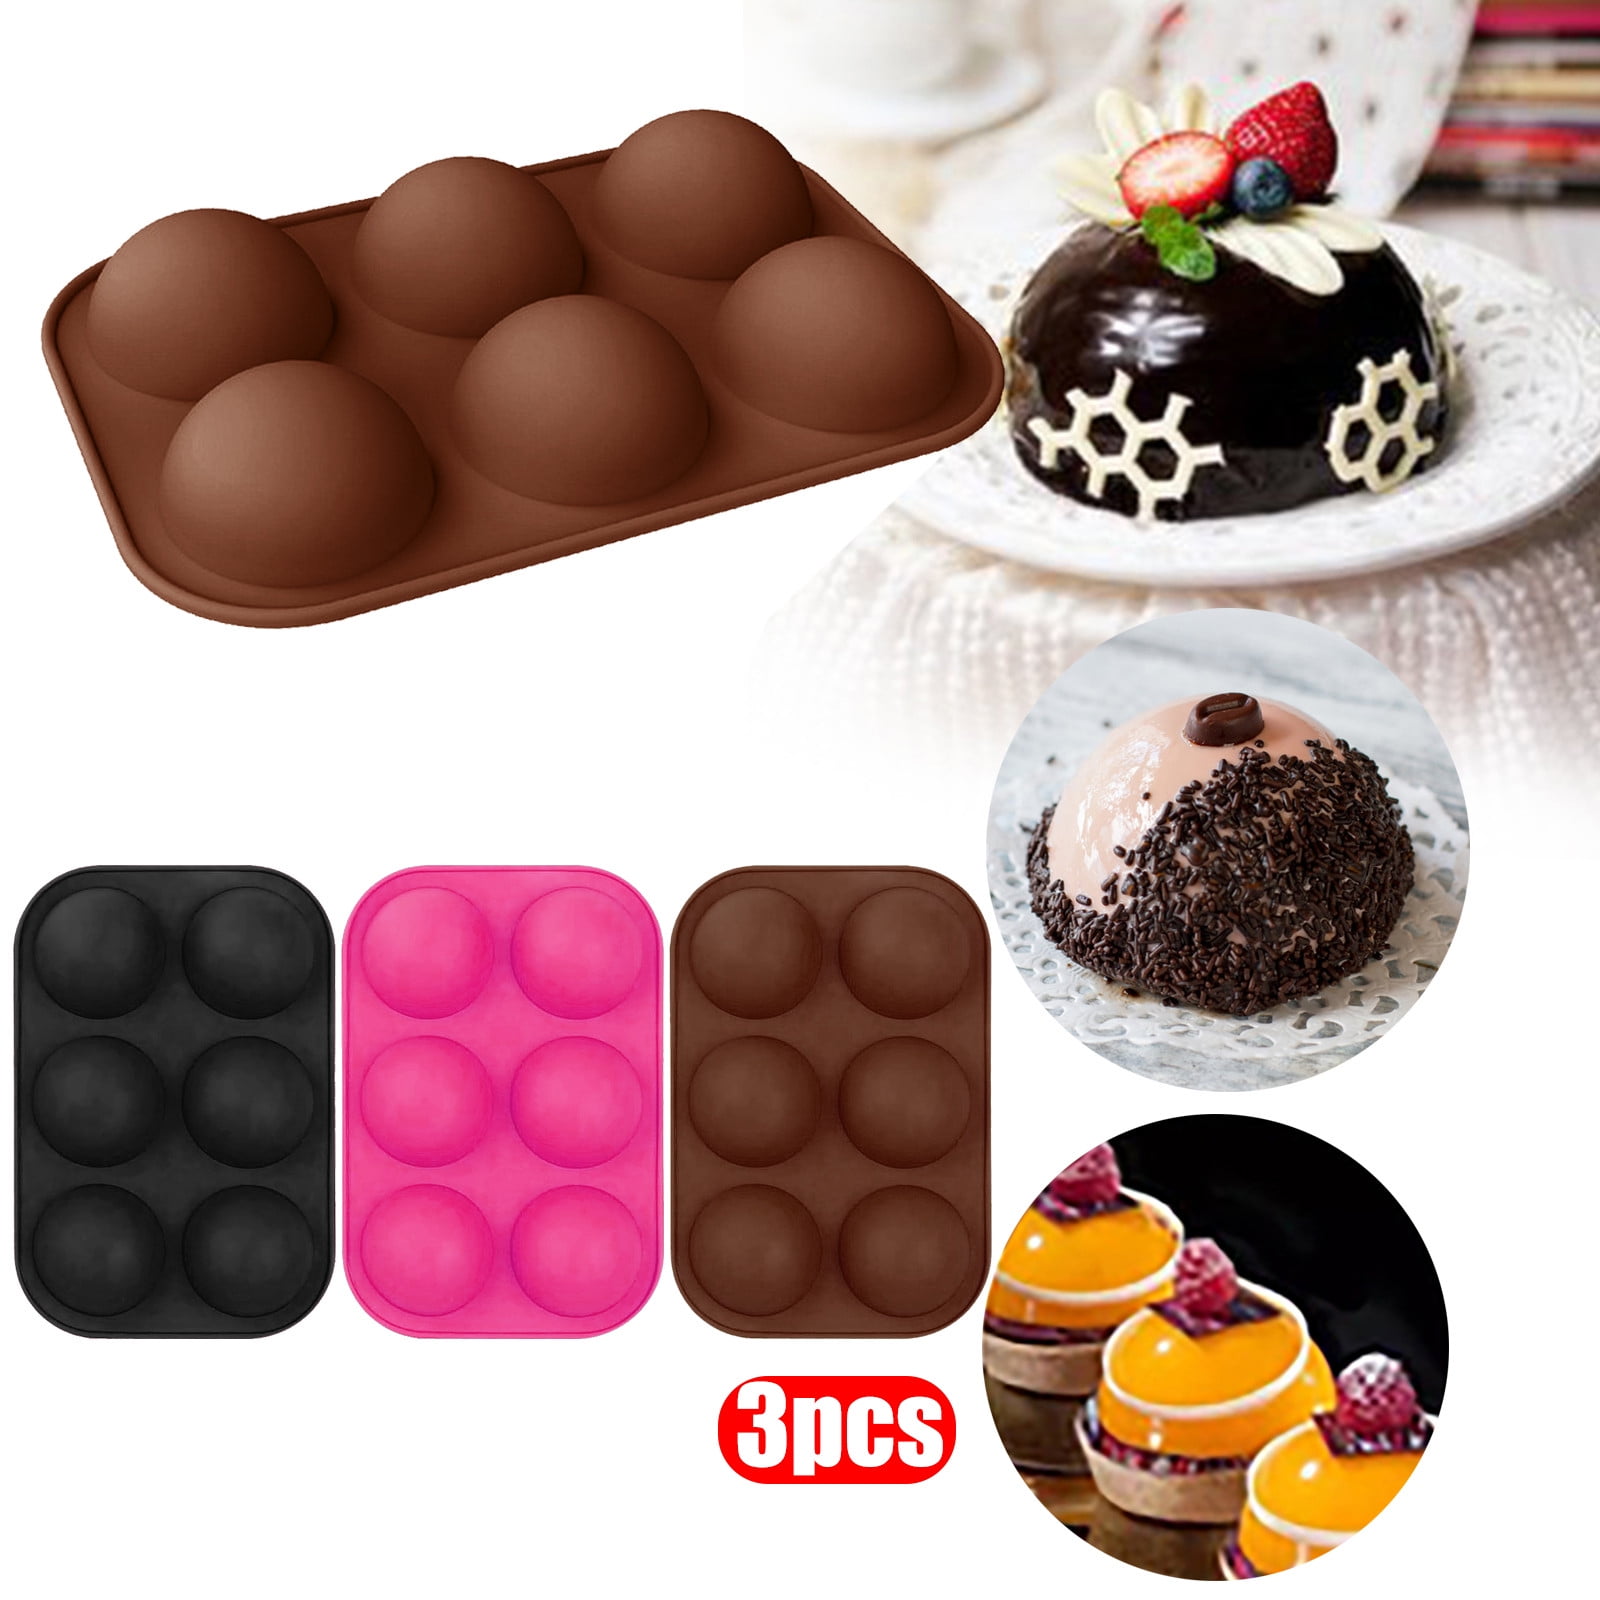 Half Ball Sphere Silicone Cake Mold Muffin Chocolate Cookie Baking Mould Pan G$ 